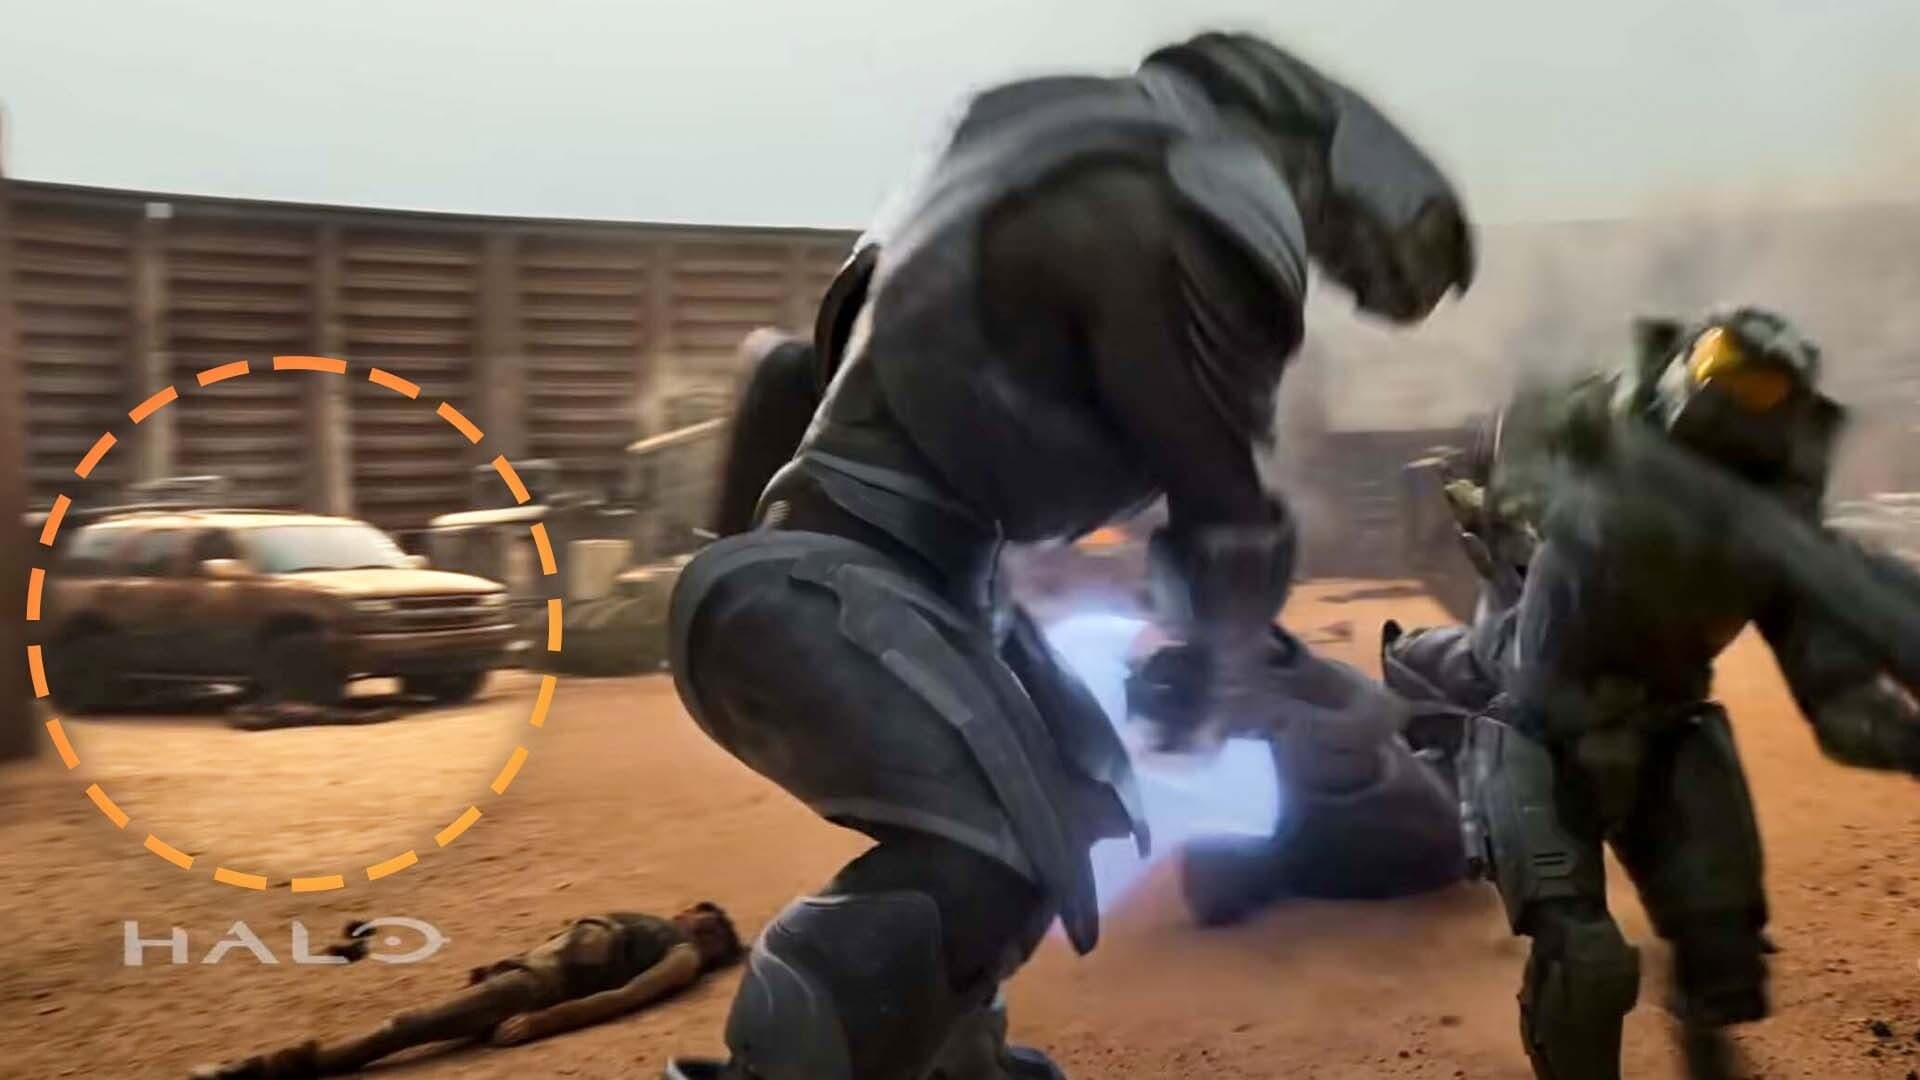 What the Hell Is This Old Chevy Tahoe Doing in the New Halo Trailer?